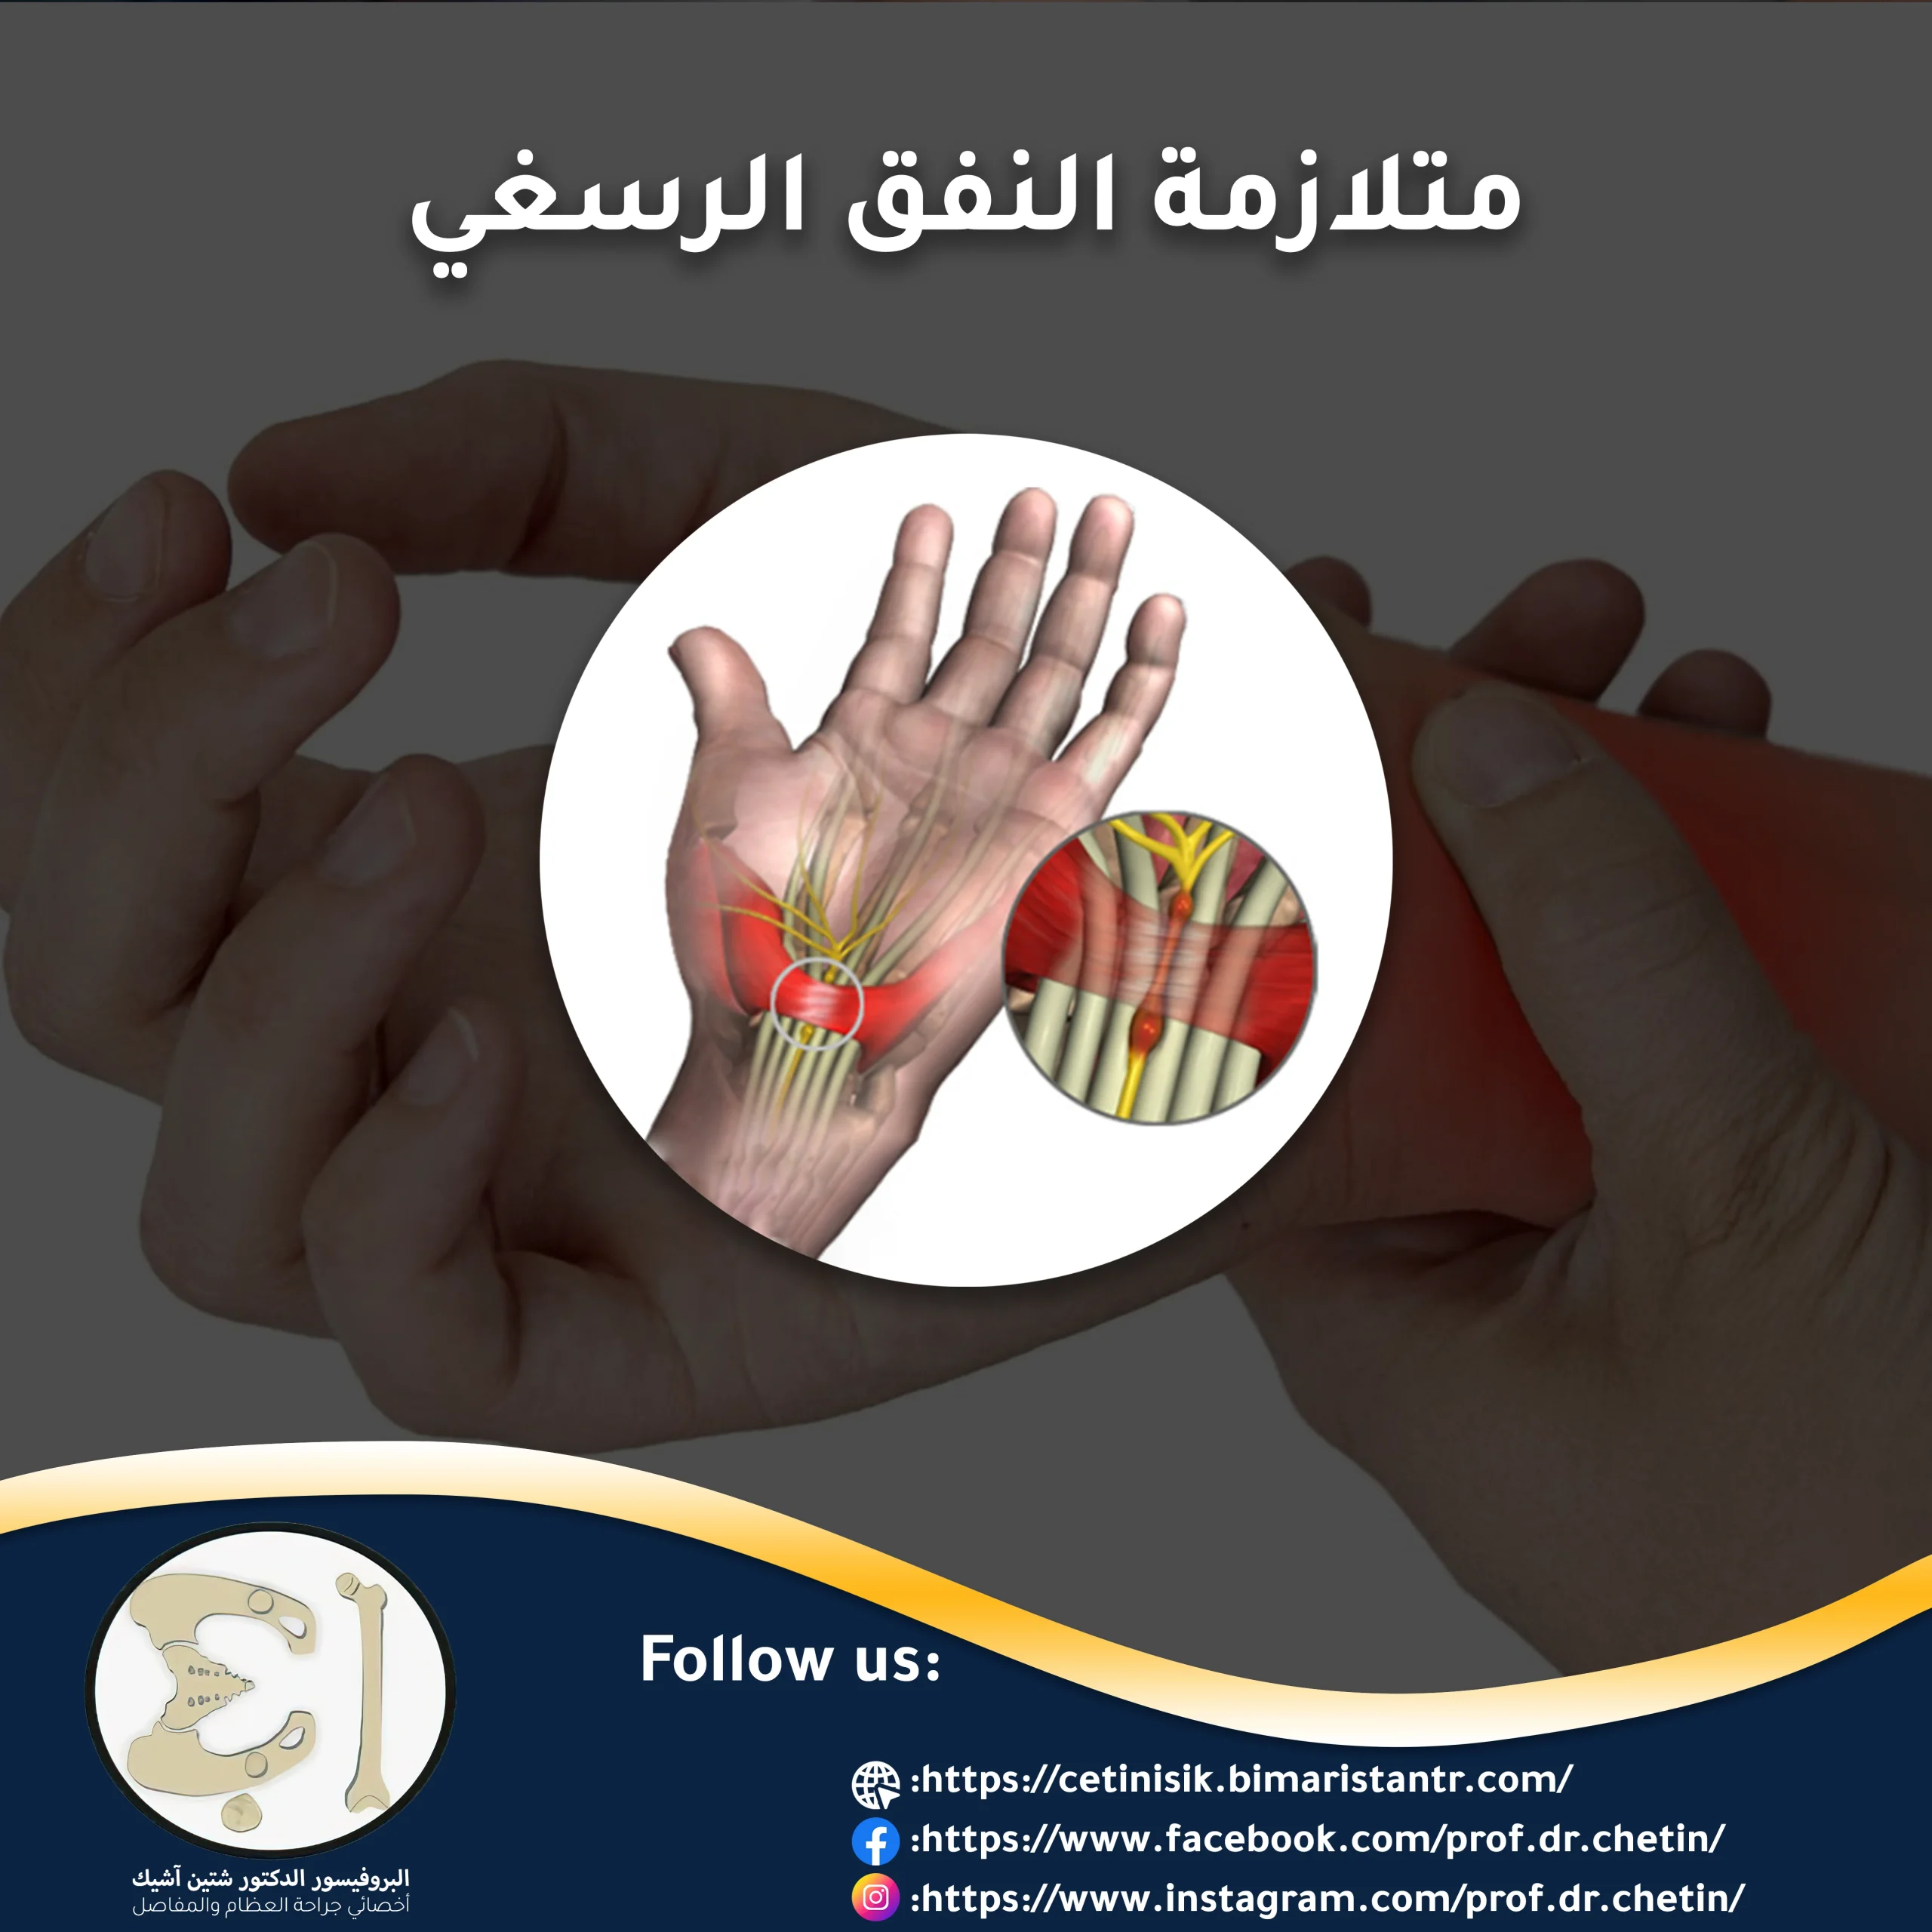 What is carpal tunnel syndrome disease